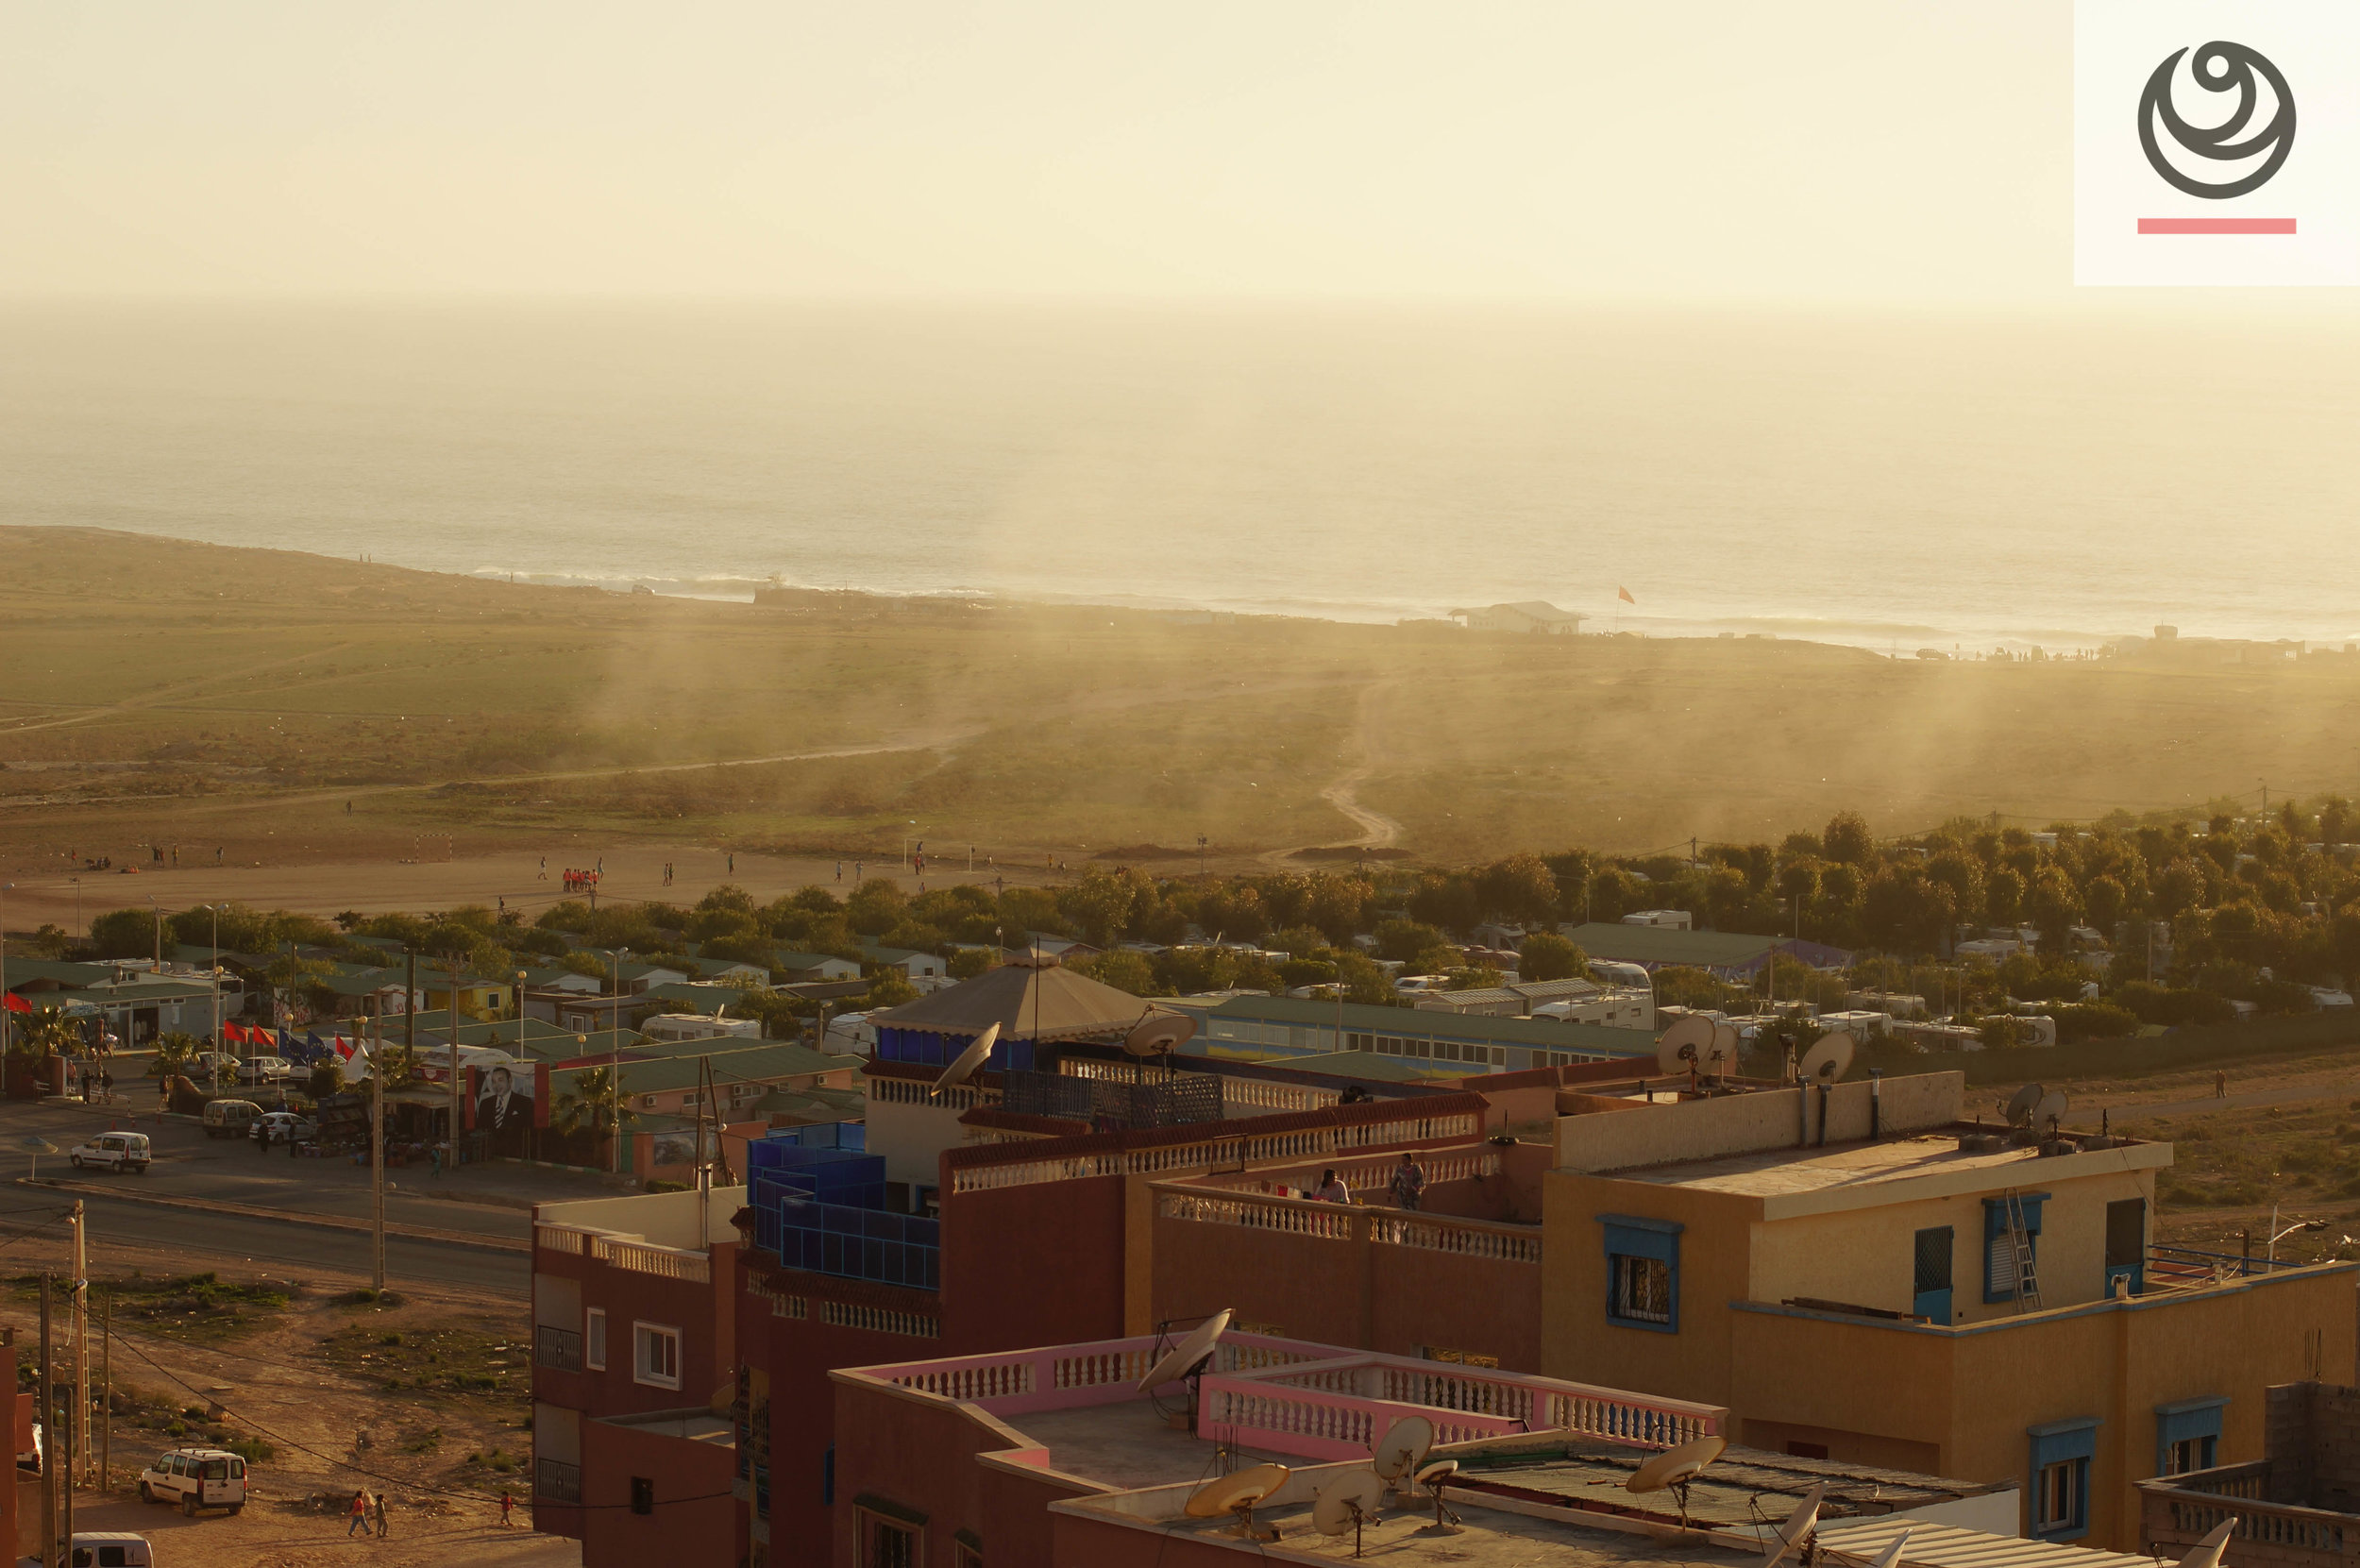 Offshore winds in the Golden hour in Morocco